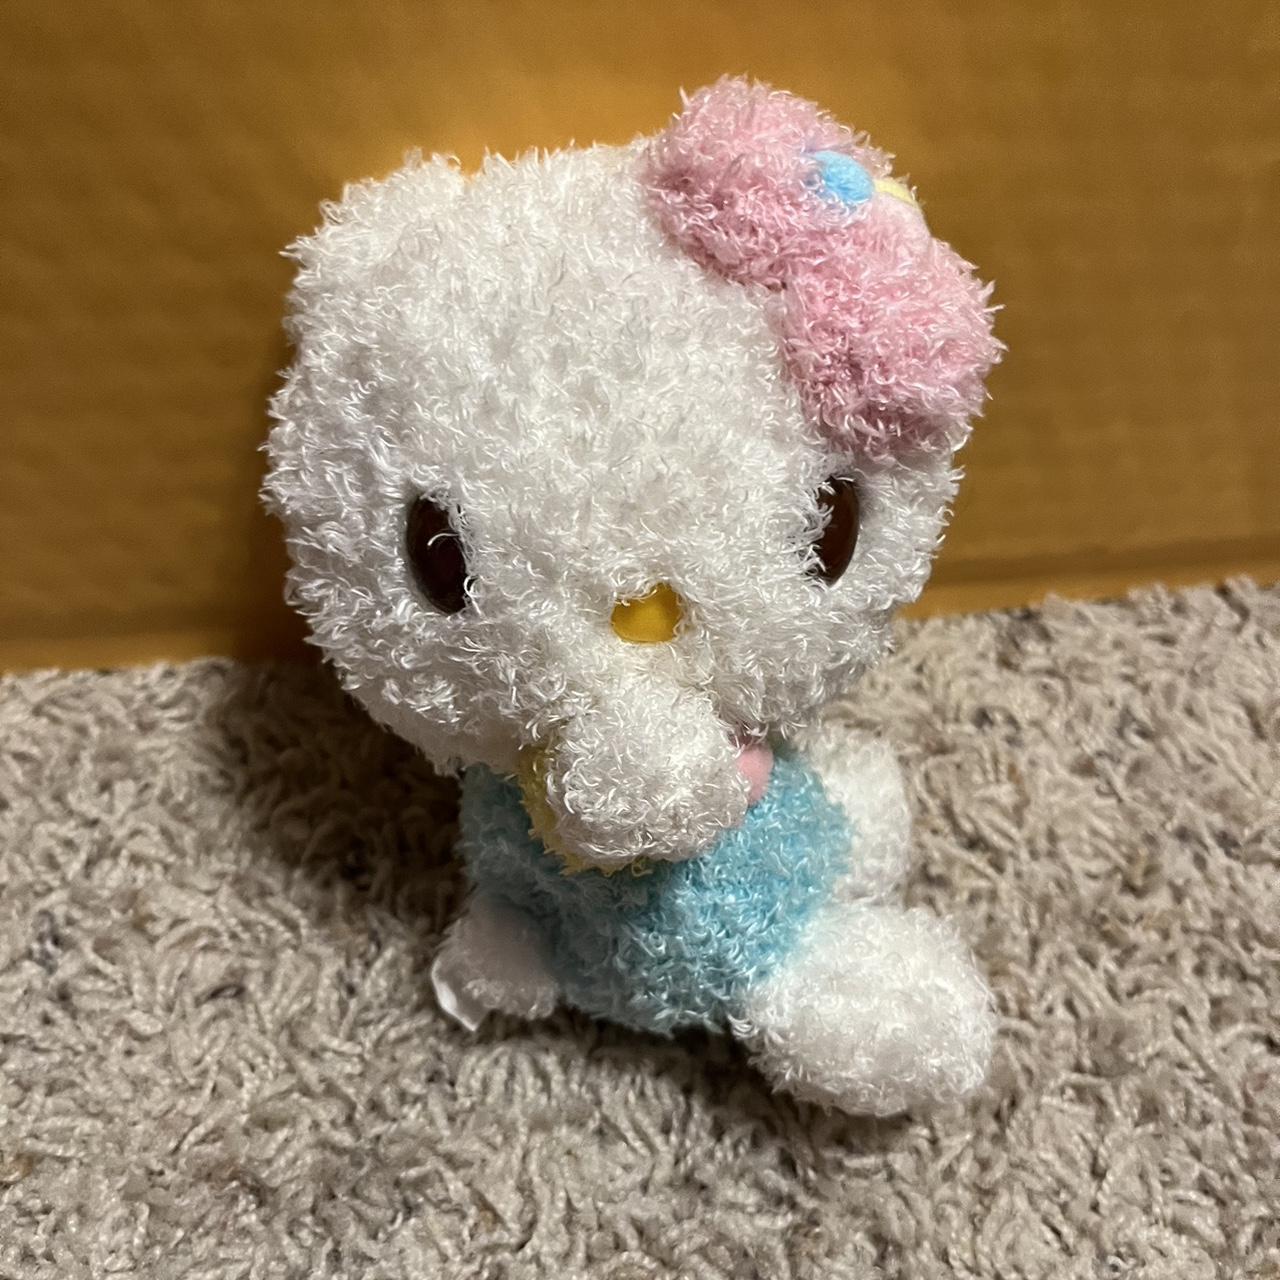 Product Image 1 - Hello Kitty Plush
Good condition